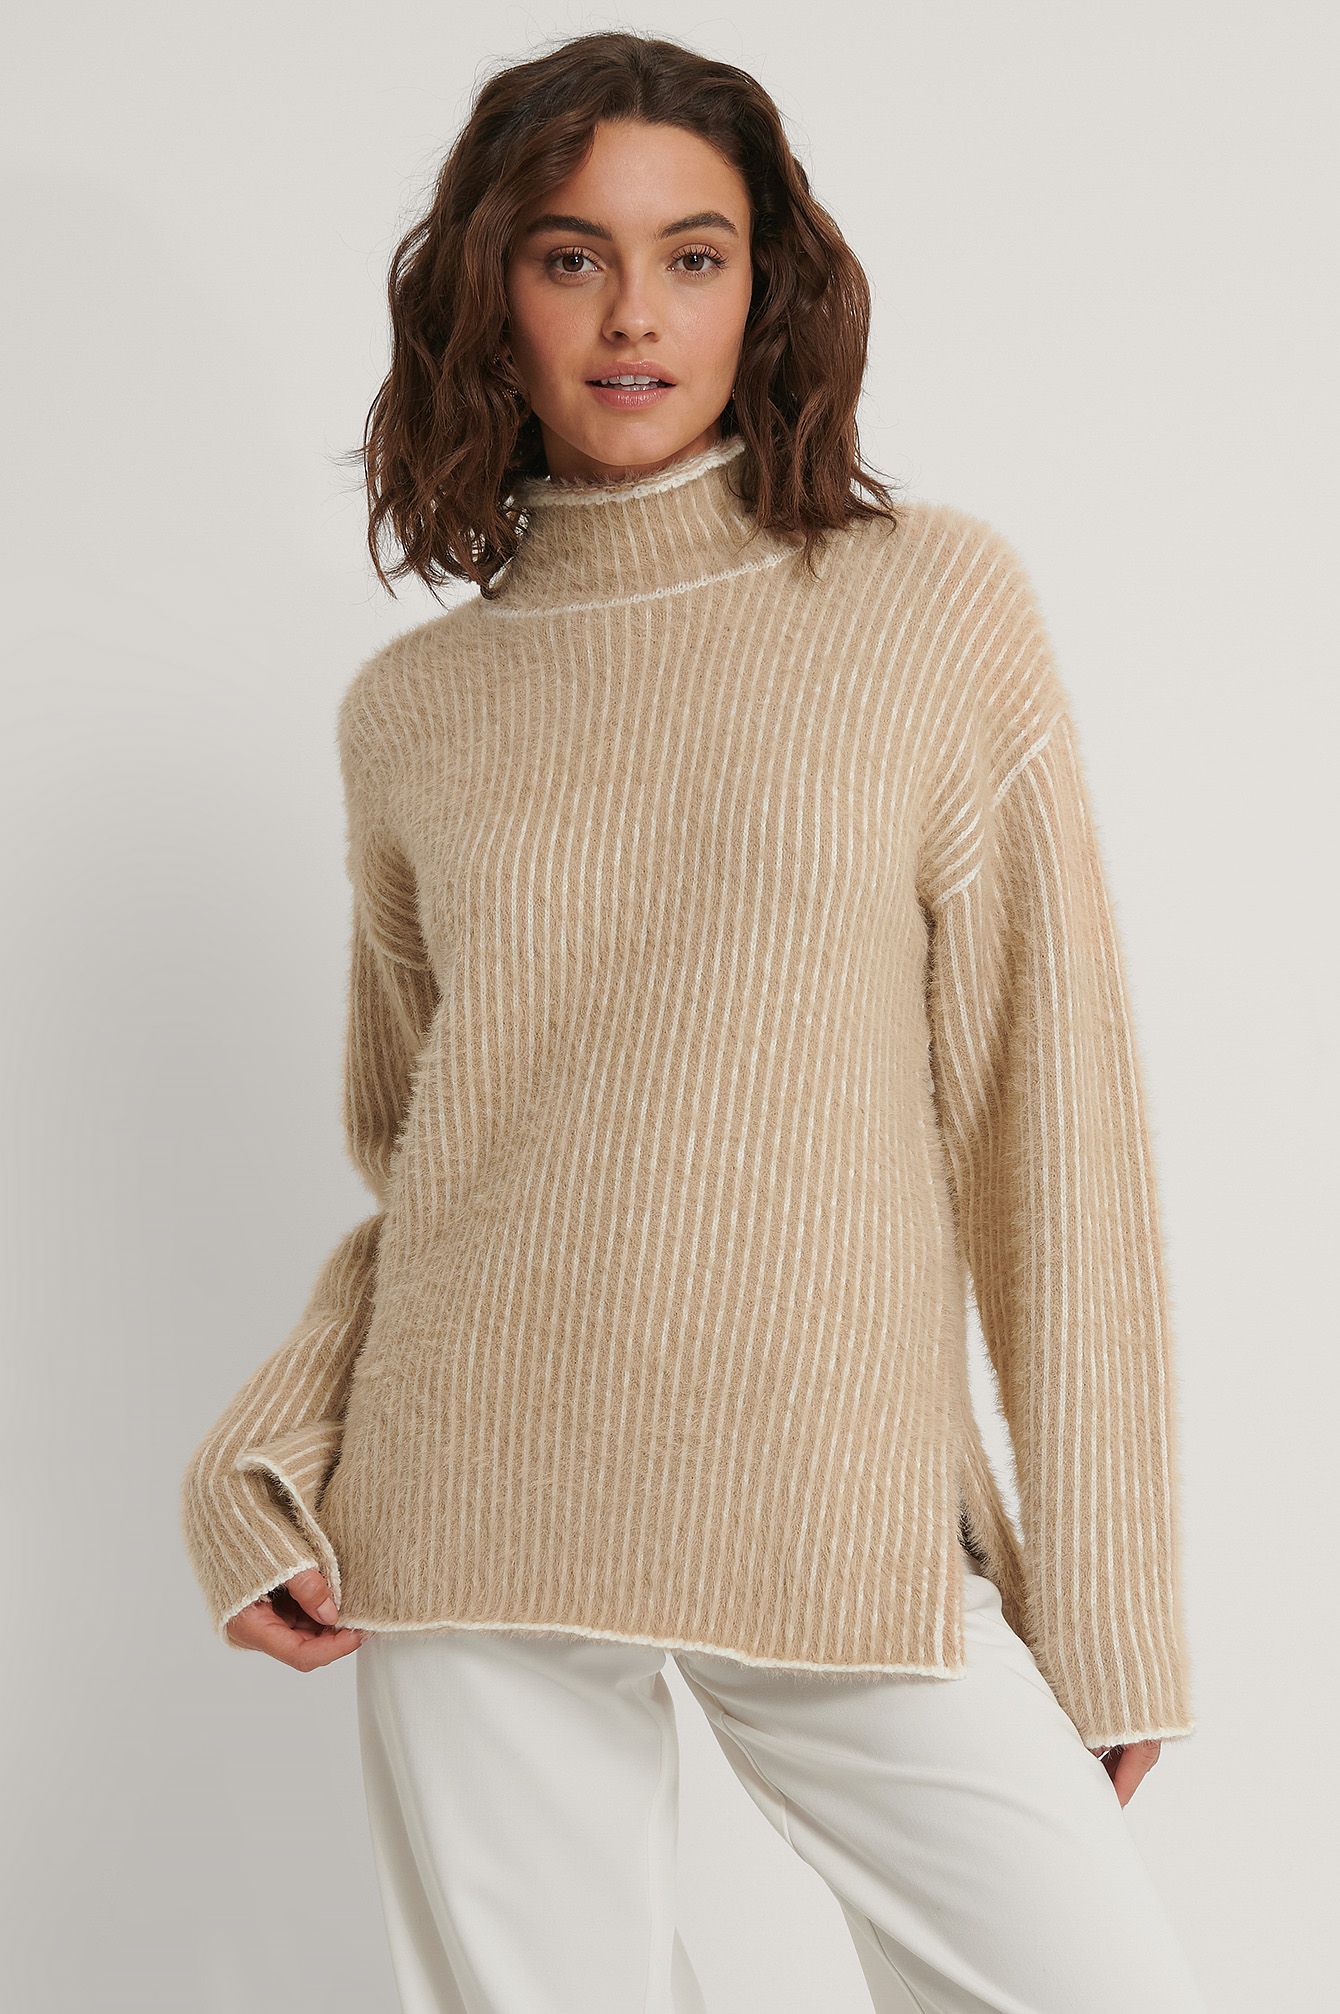 Beige/White Small Stripe Brushed Knitted Sweater